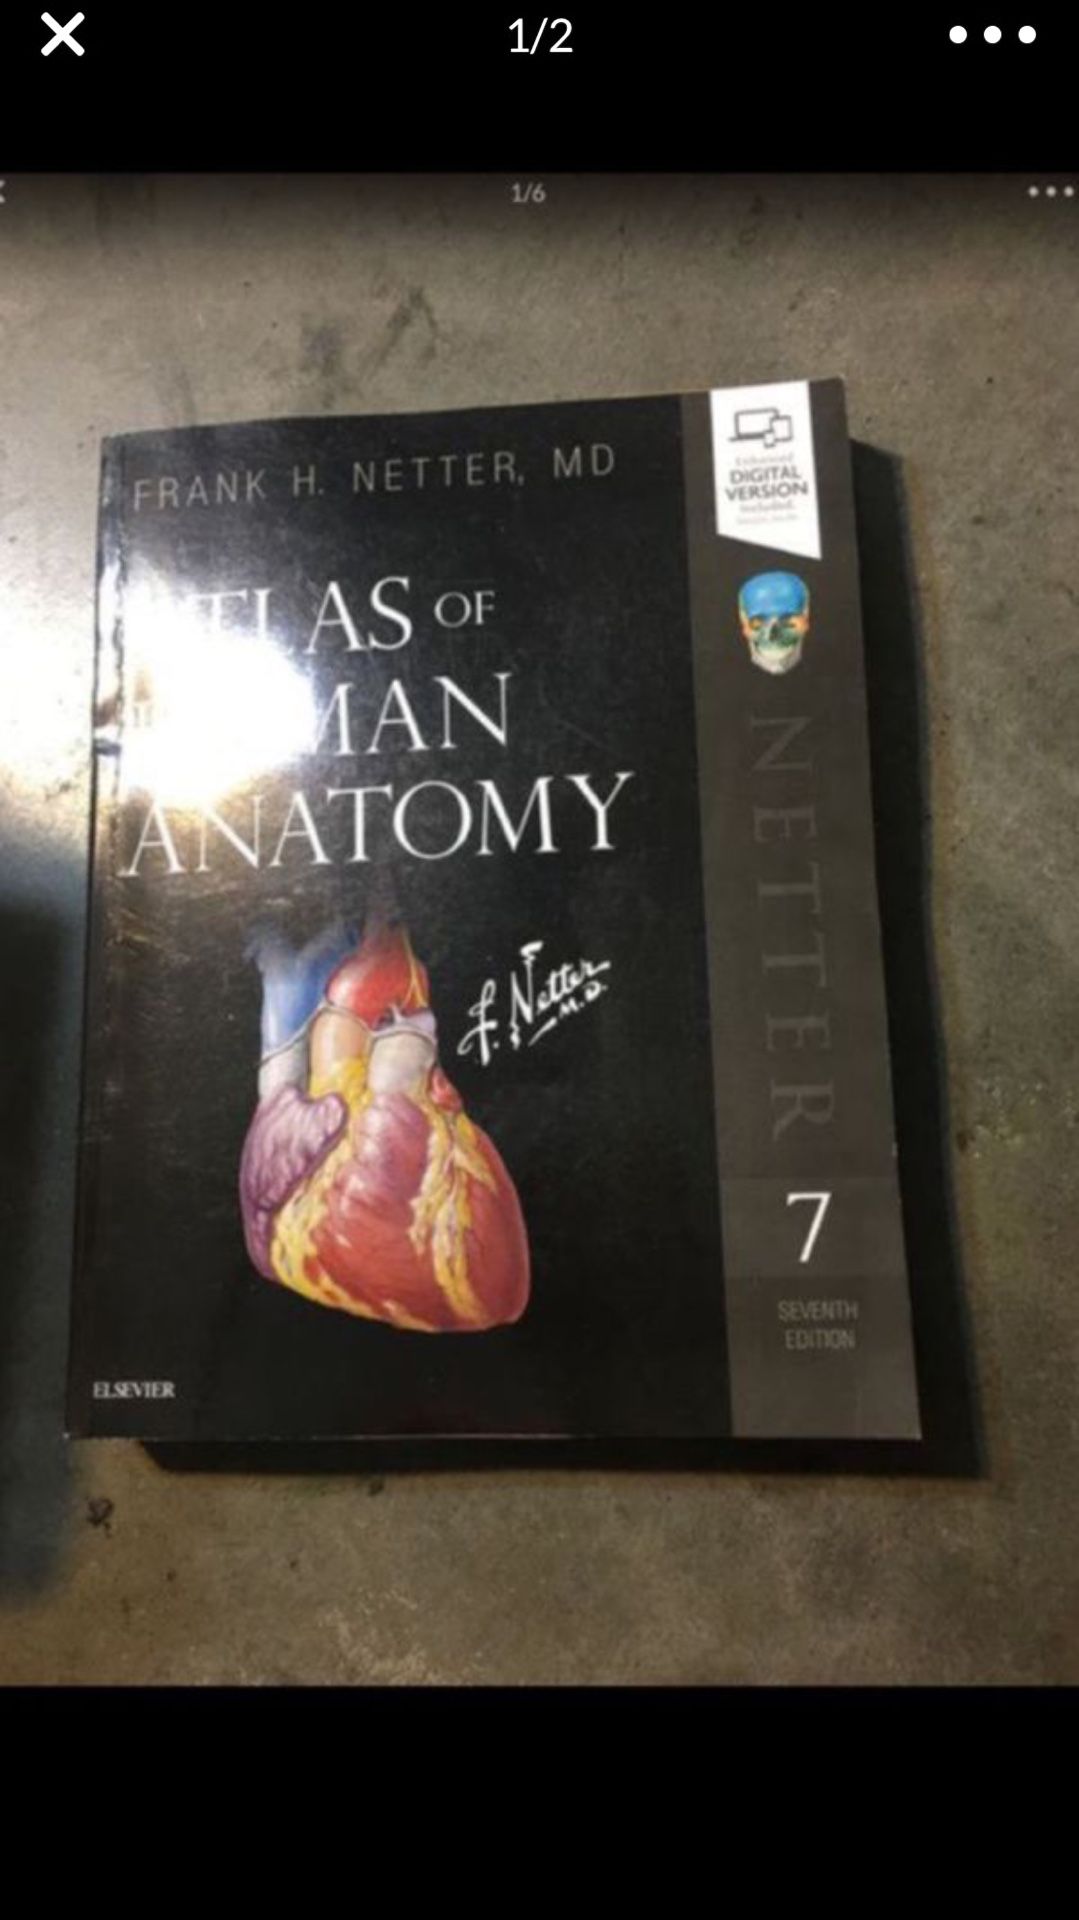 Atlas of Human Anatomy (Netter Basic Science) 7th Edition Cover shows Wears code used.